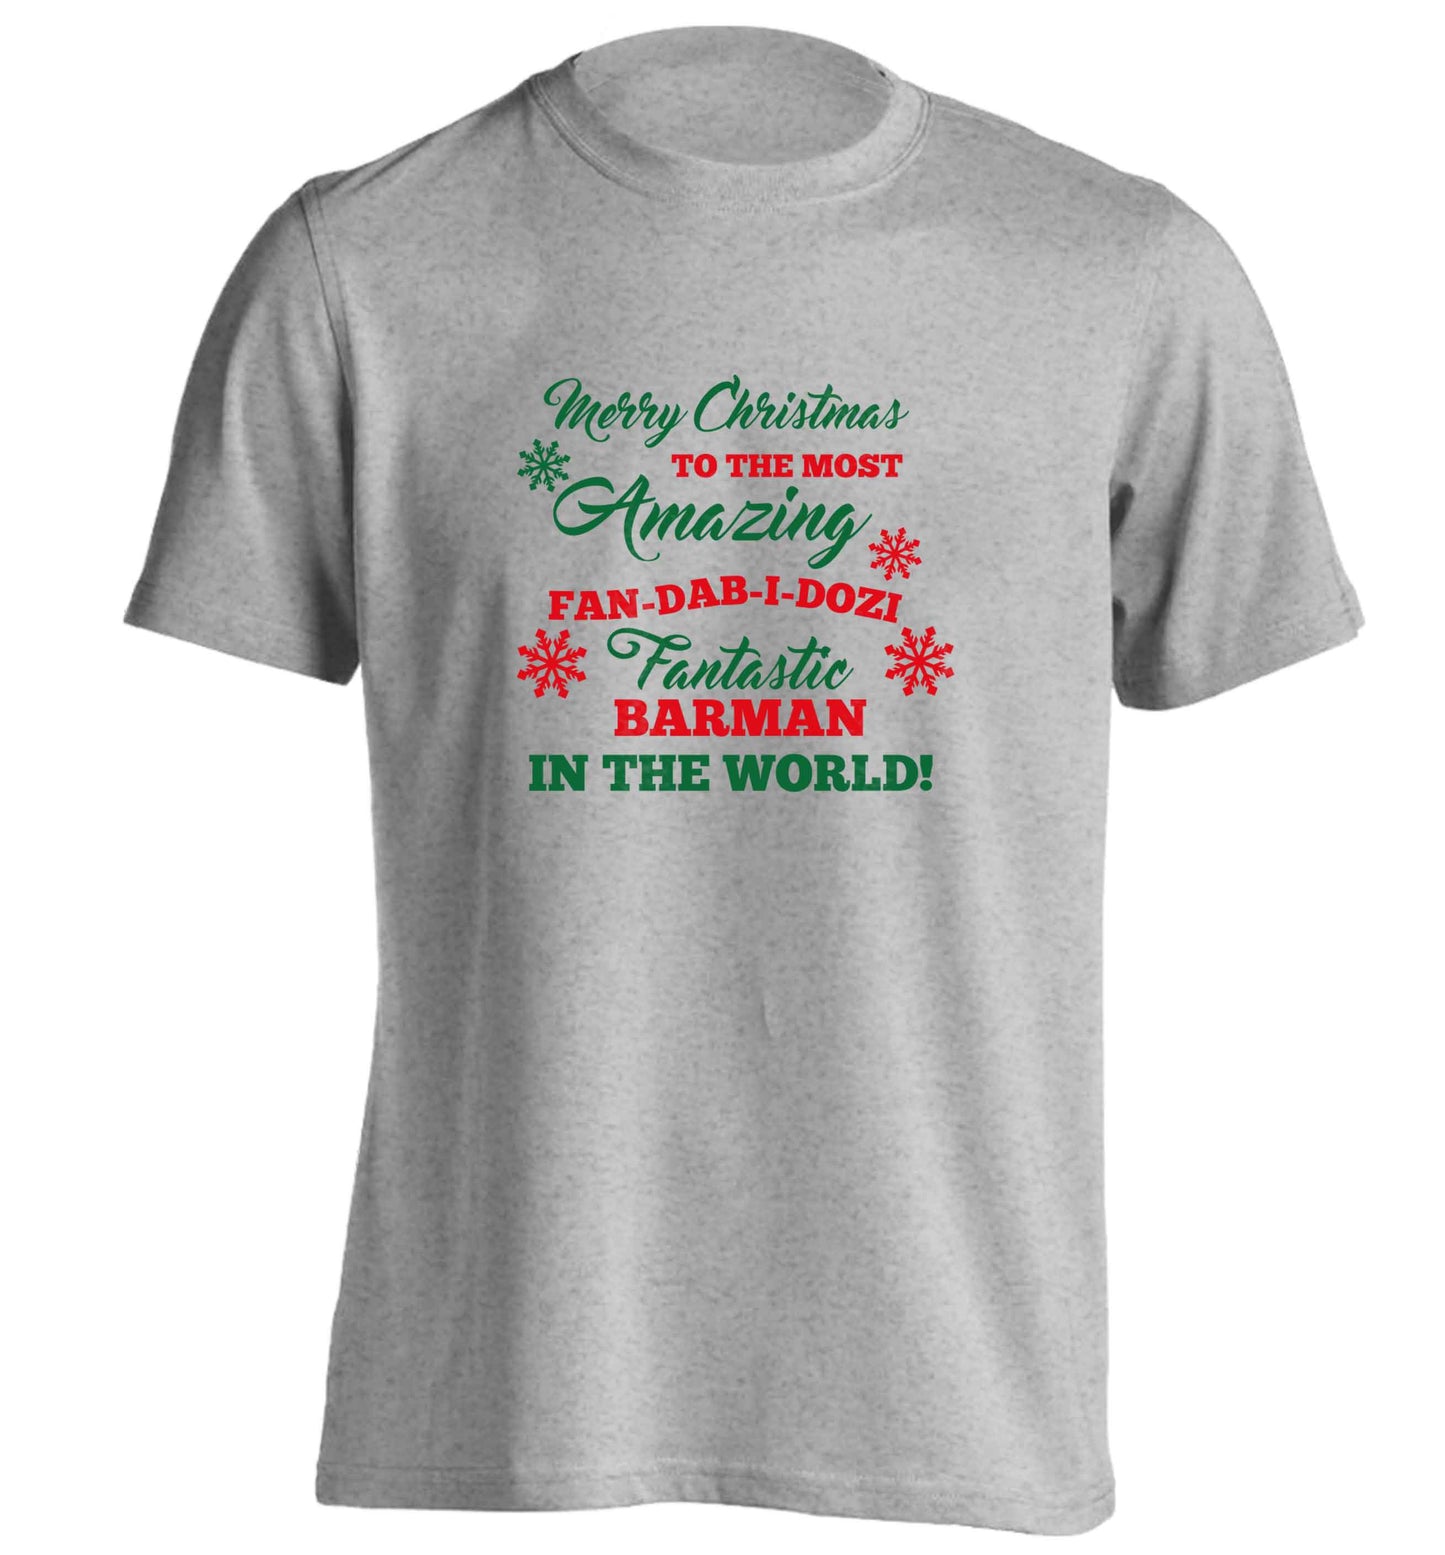 Merry Christmas to the most amazing barman in the world! adults unisex grey Tshirt 2XL